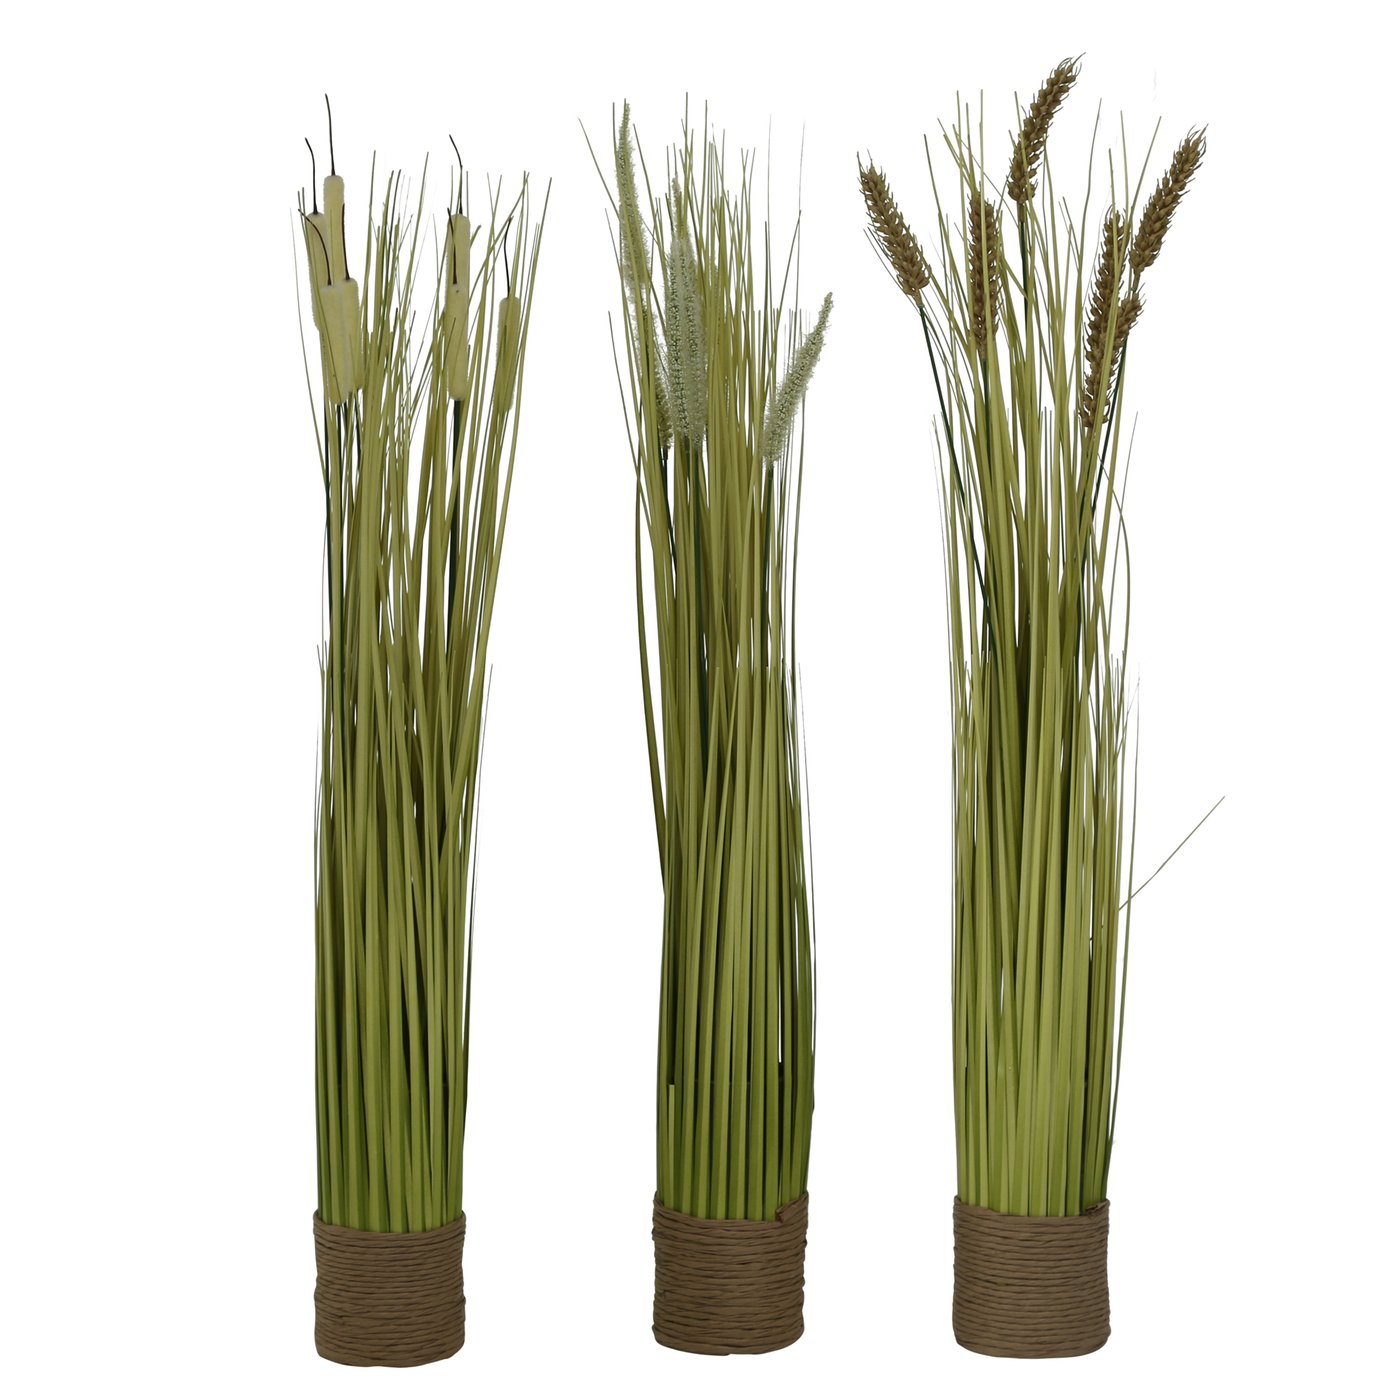 &Quirky Faux Potted Grasses Plant